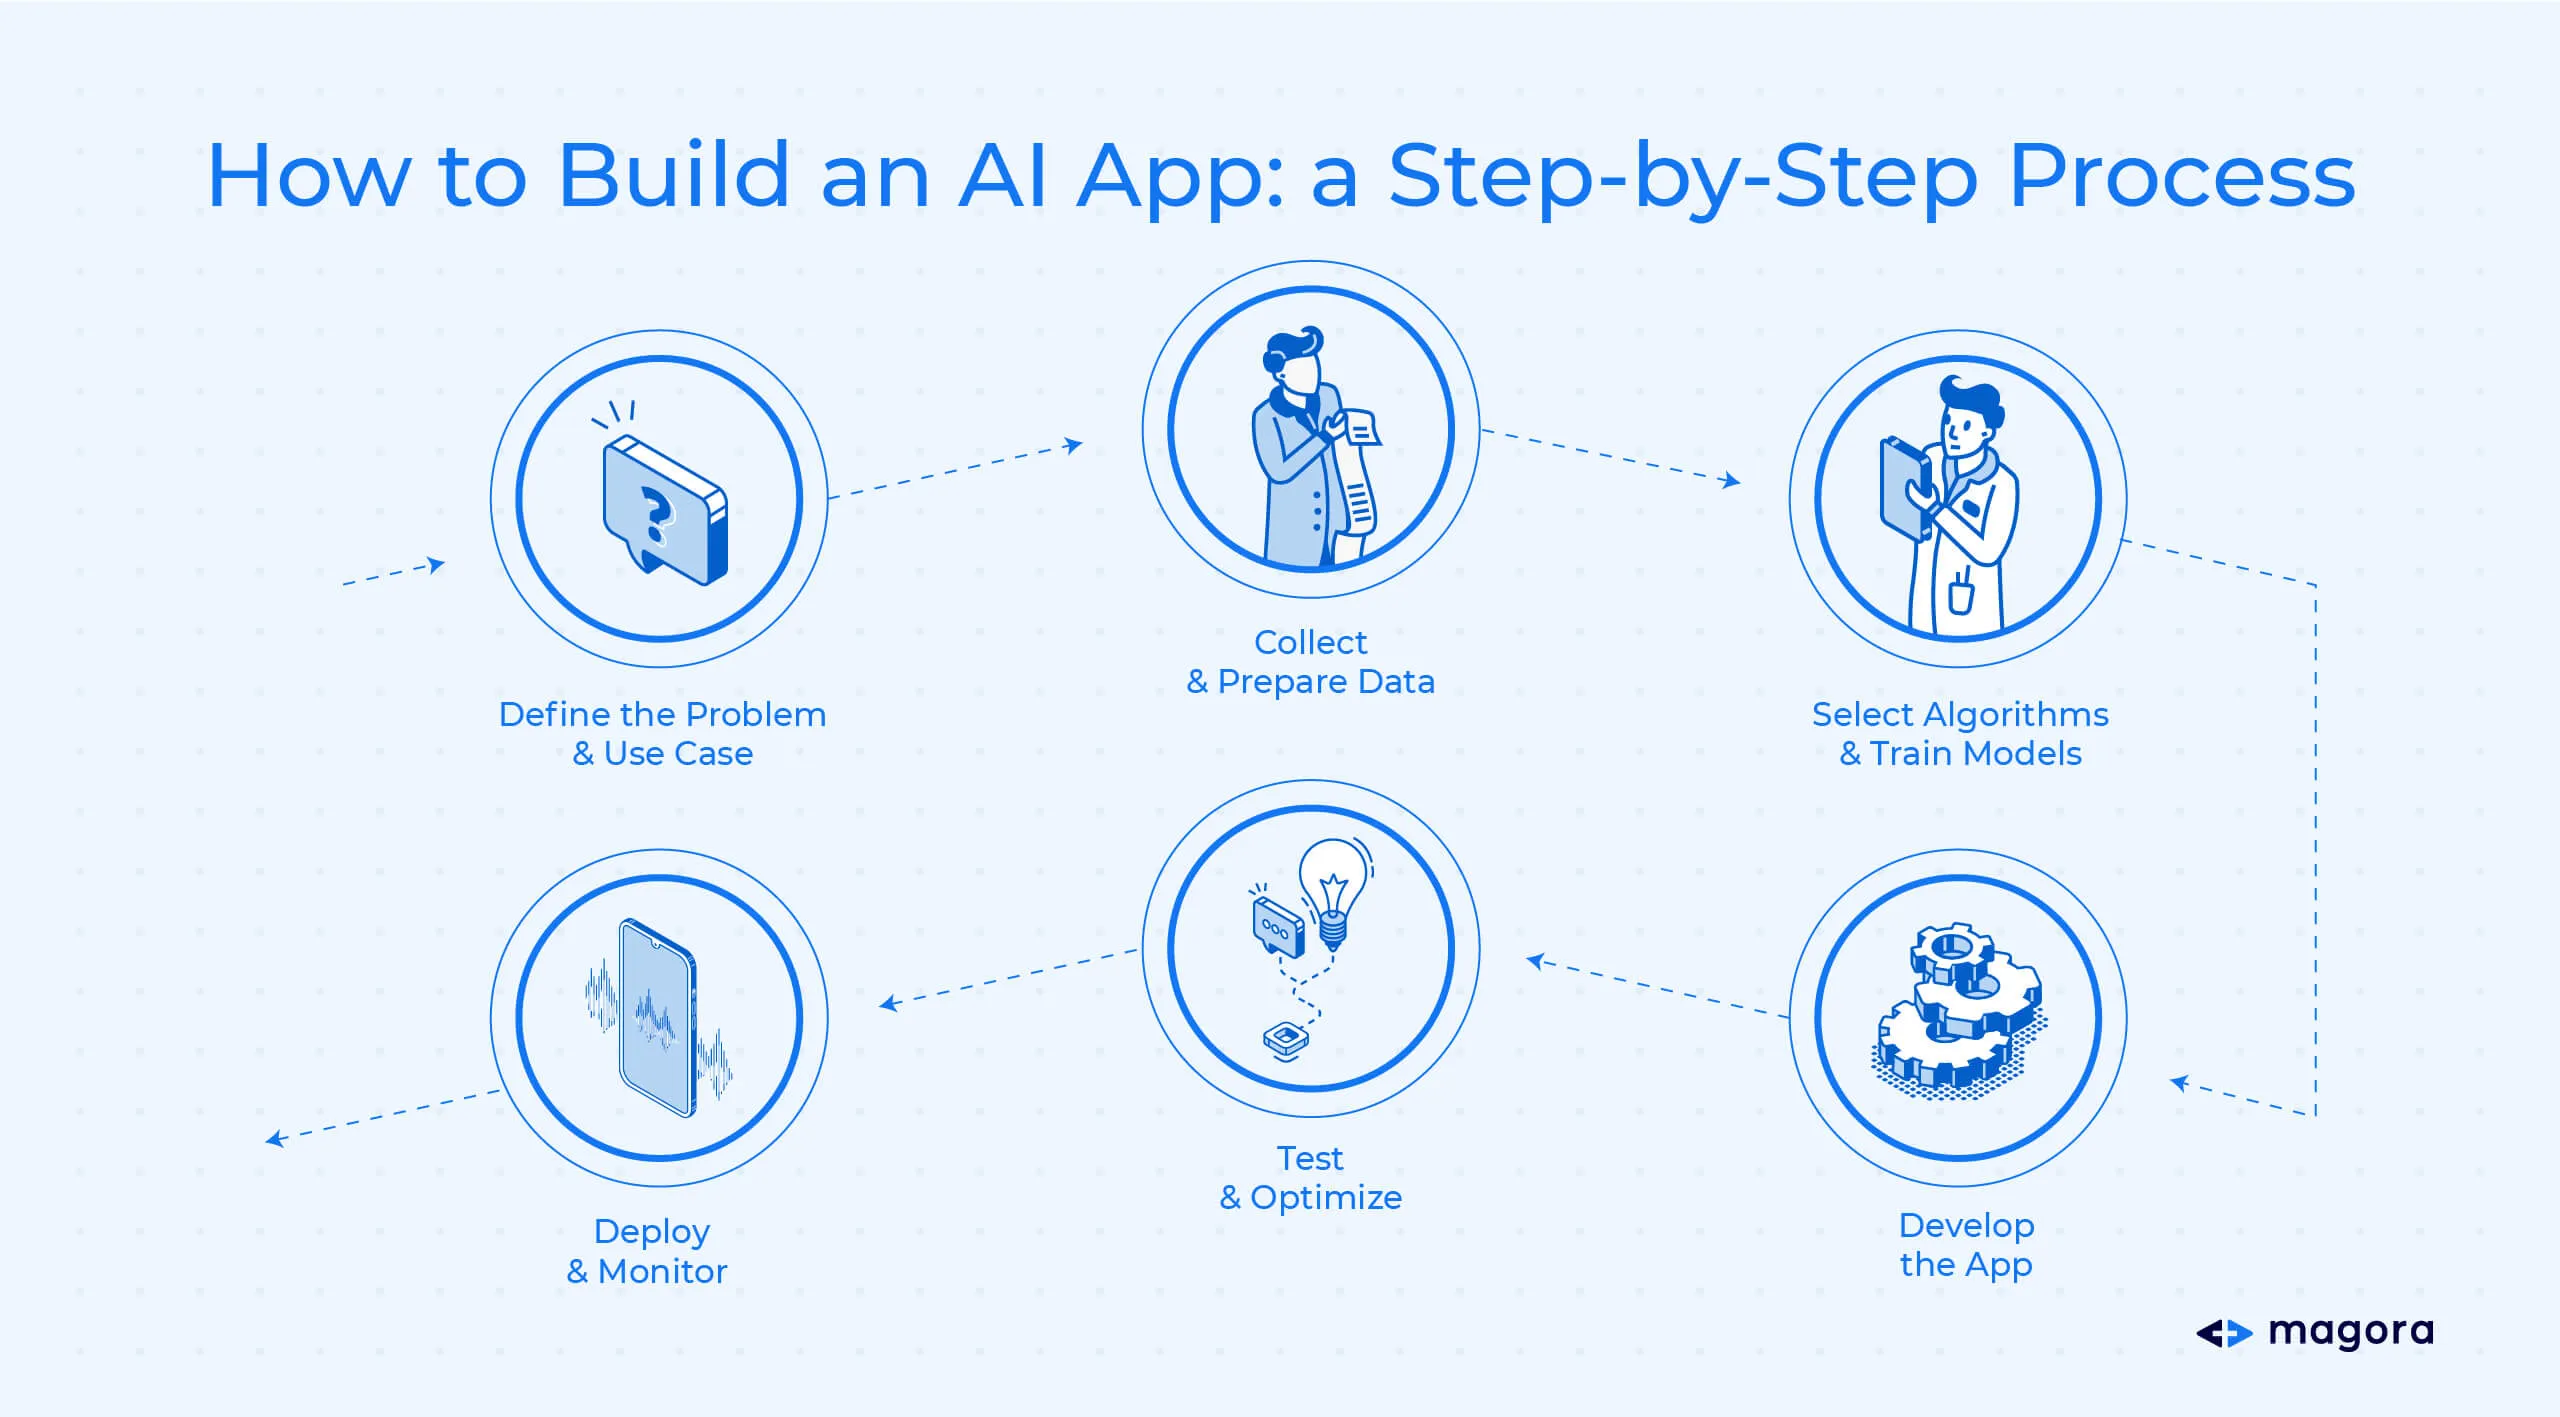 How to Build an AI App: a Step-by-Step Process